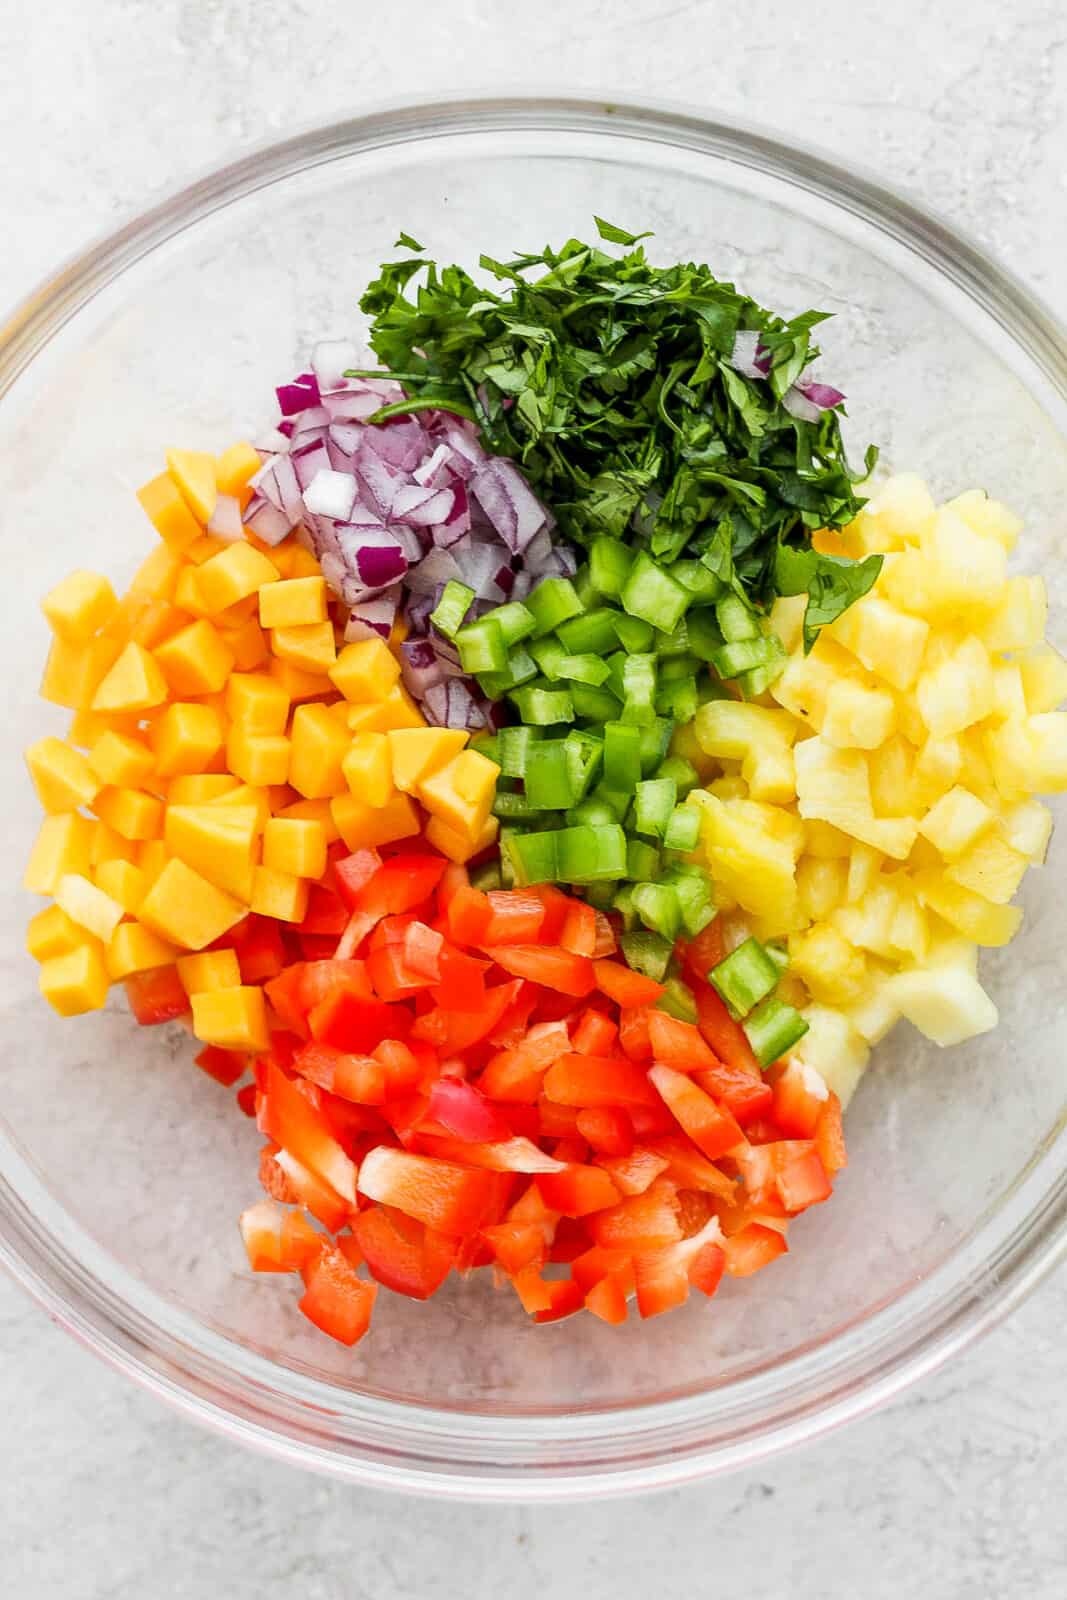 Cut-up pieces of mango, pineapple, red bell pepper, red onion, and cilantro in a mixing bowl.